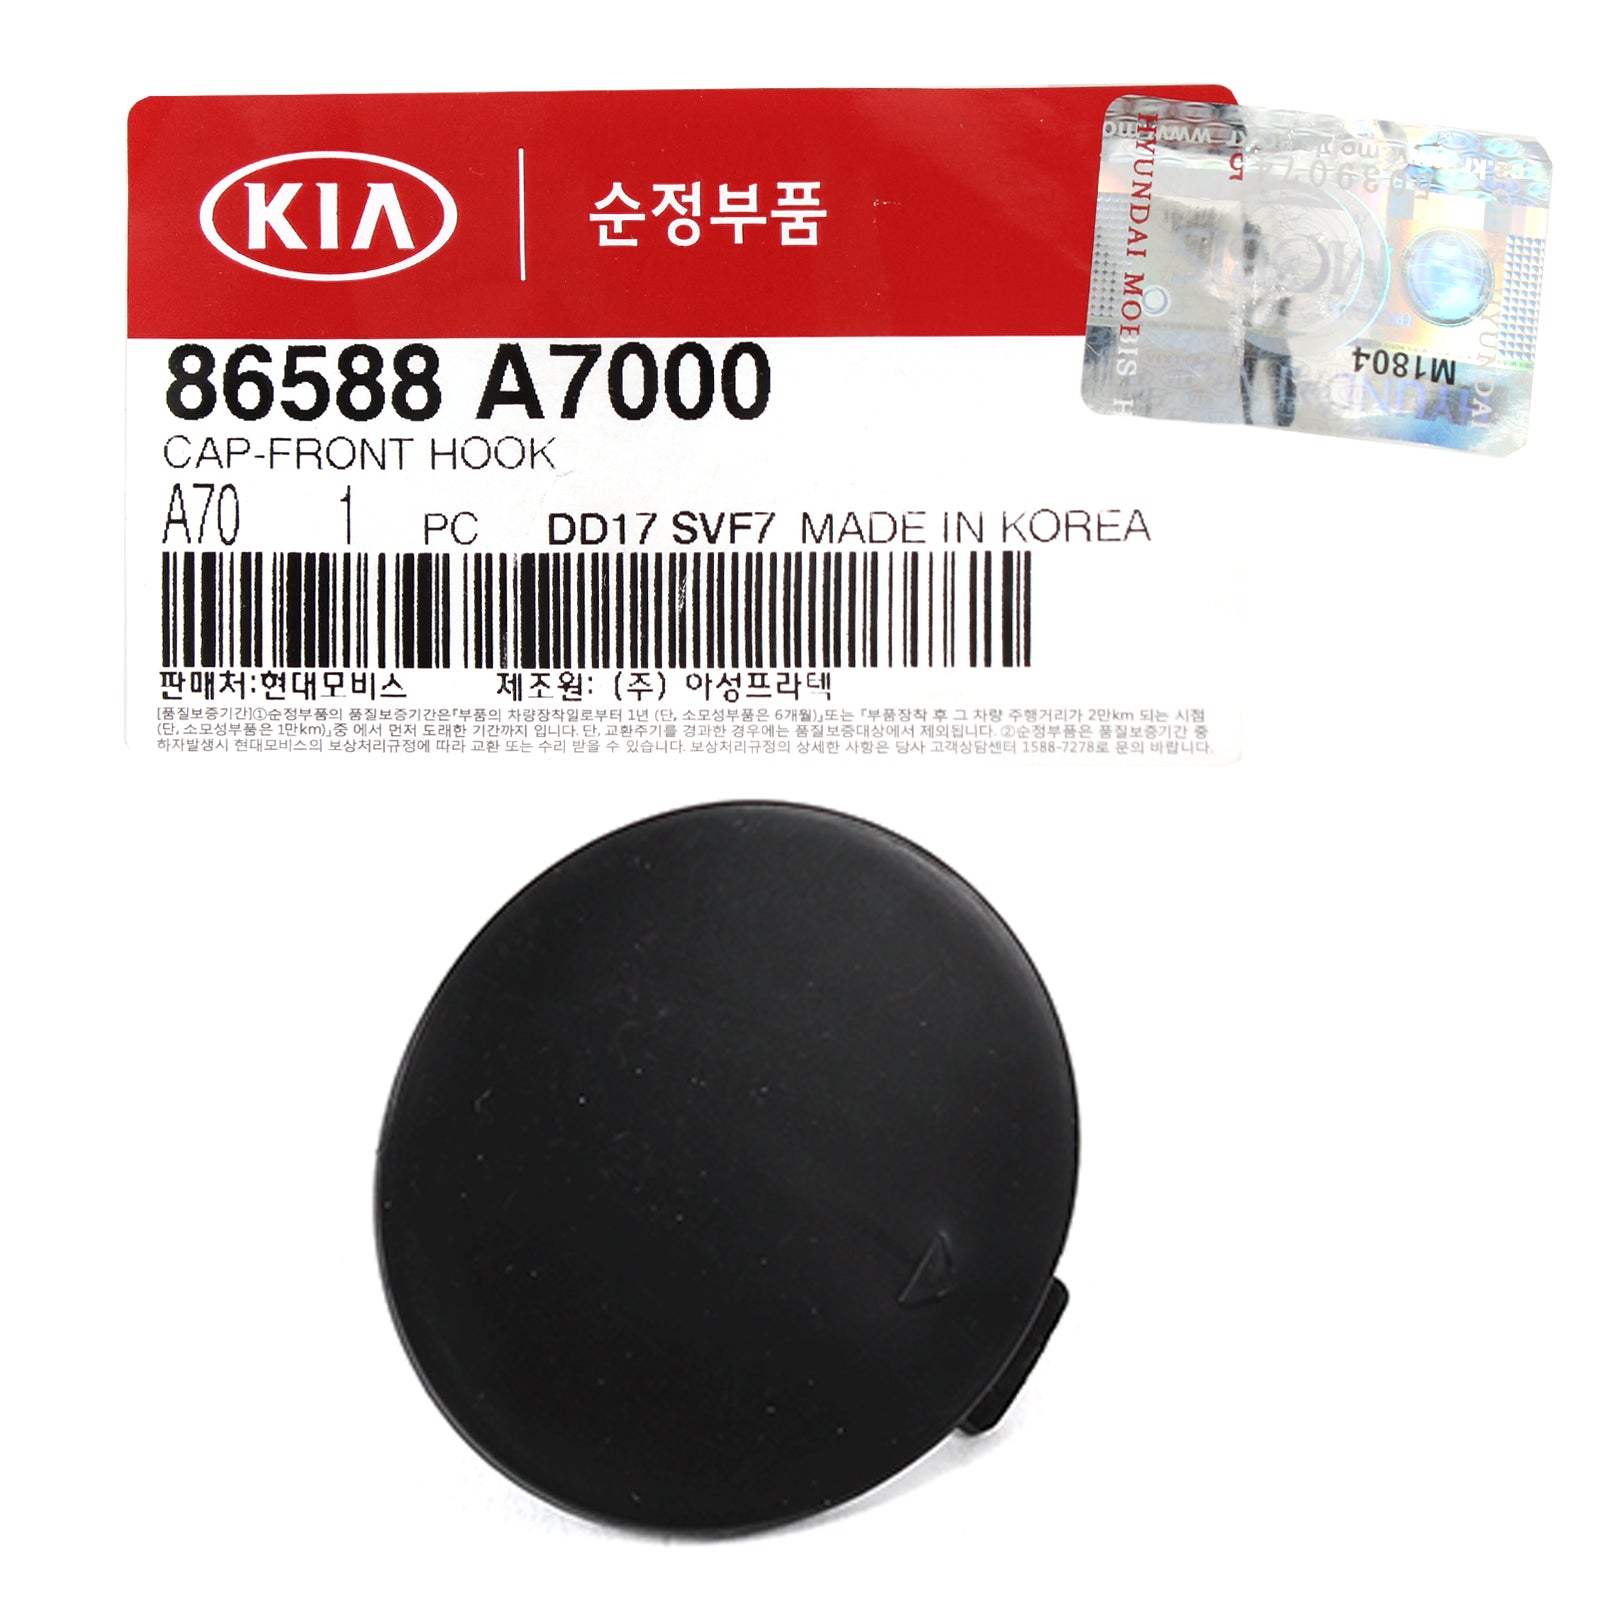 GENUINE Front Bumper Tow Hook Eye Cap Cover for 2014-2016 Kia Forte 86588A7000